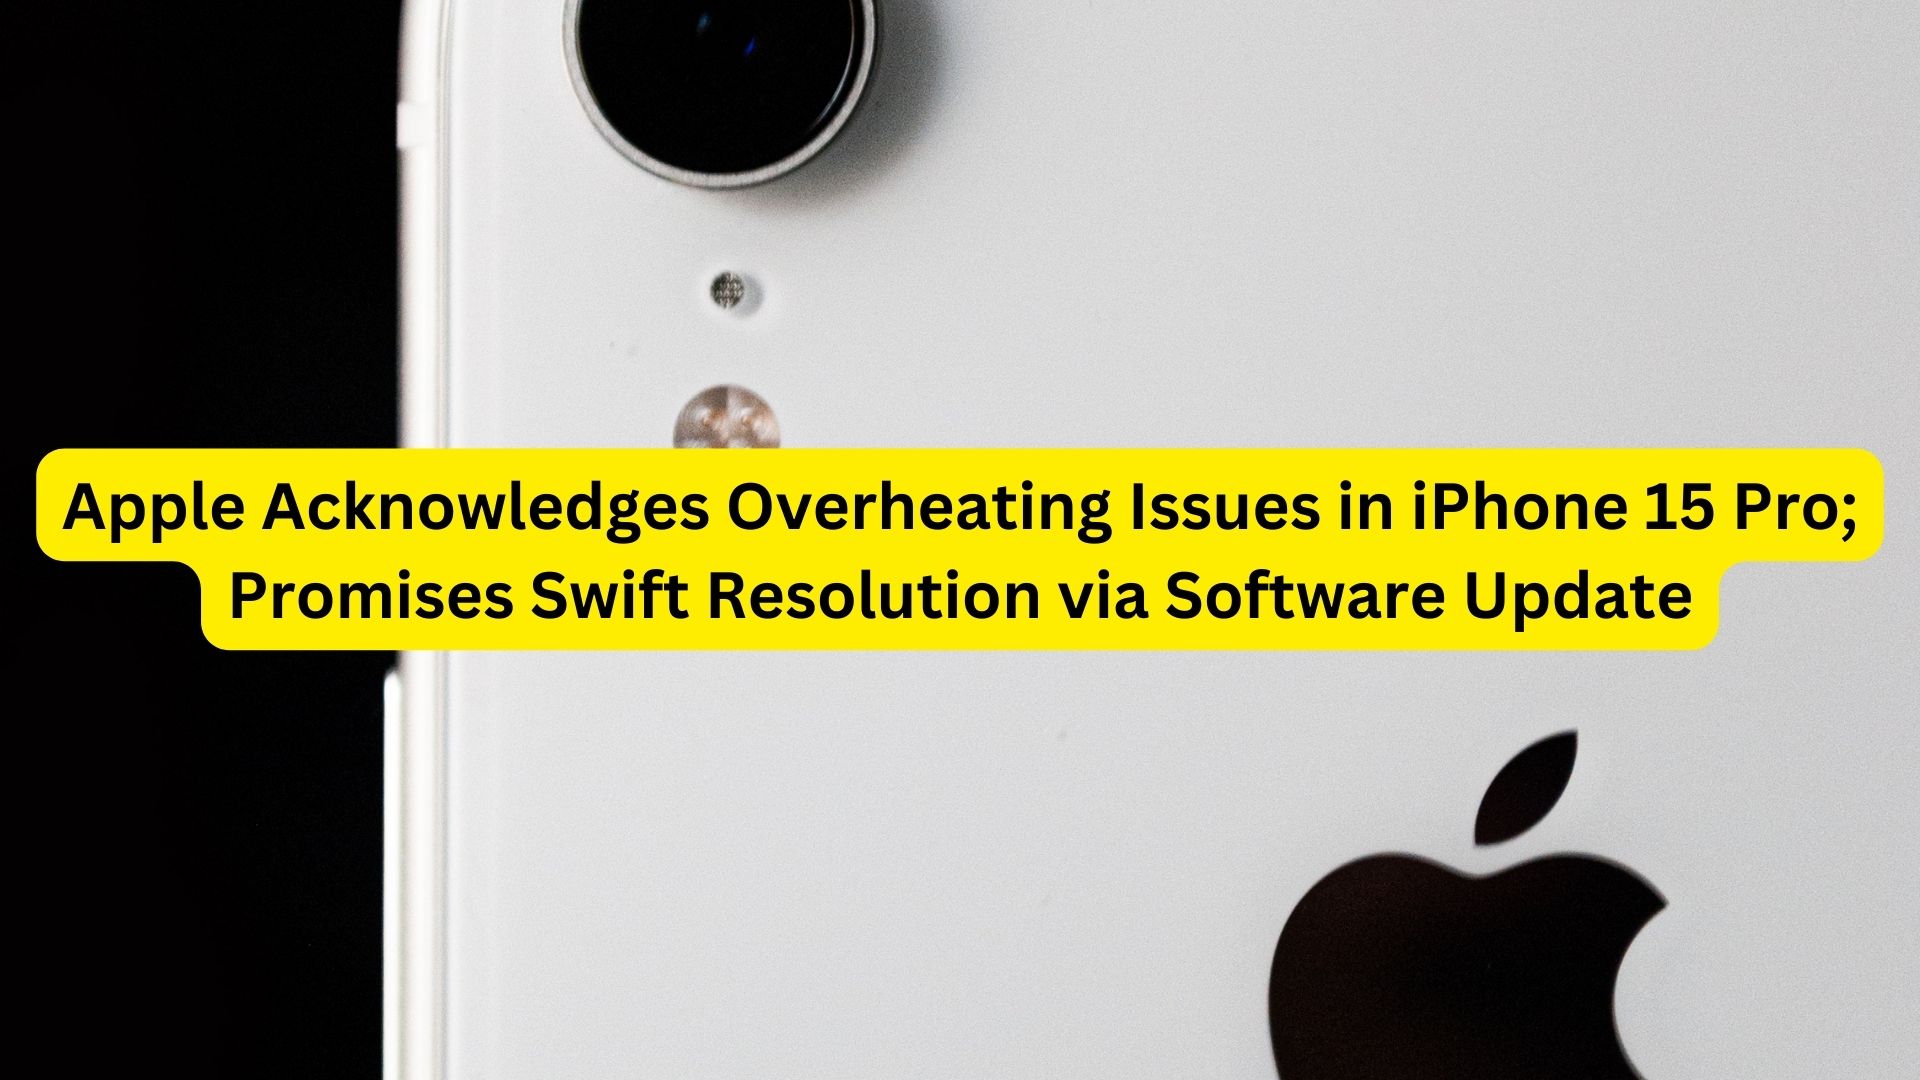 Apple Acknowledges Overheating Issues in iPhone 15 Pro; Promises Swift Resolution via Software Update